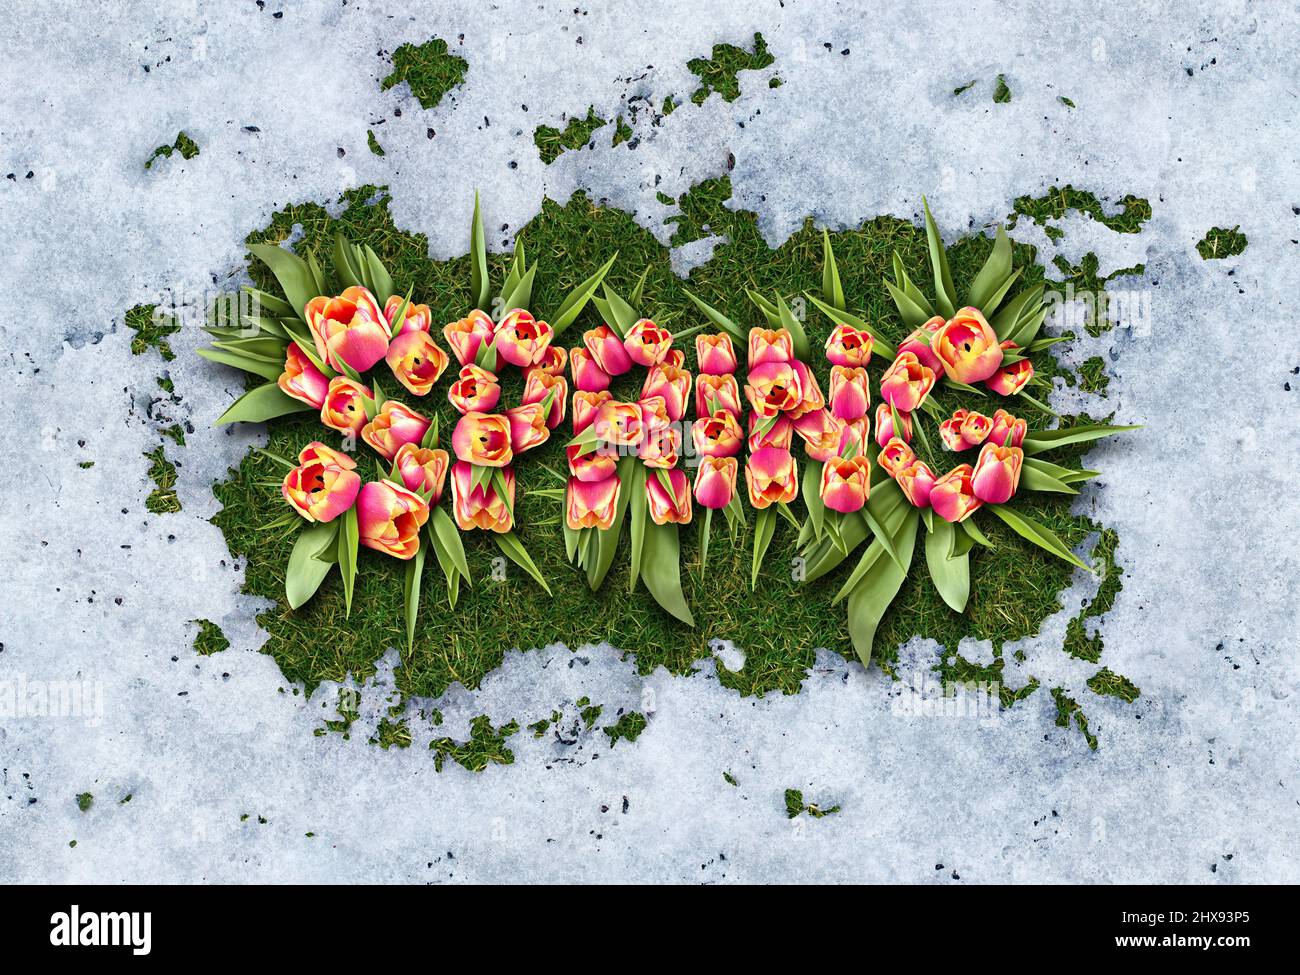 Spring symbol as thawing melting after winter weather and before summer as white snow with tulips and green grass shaped as text with frosted ice. Stock Photo